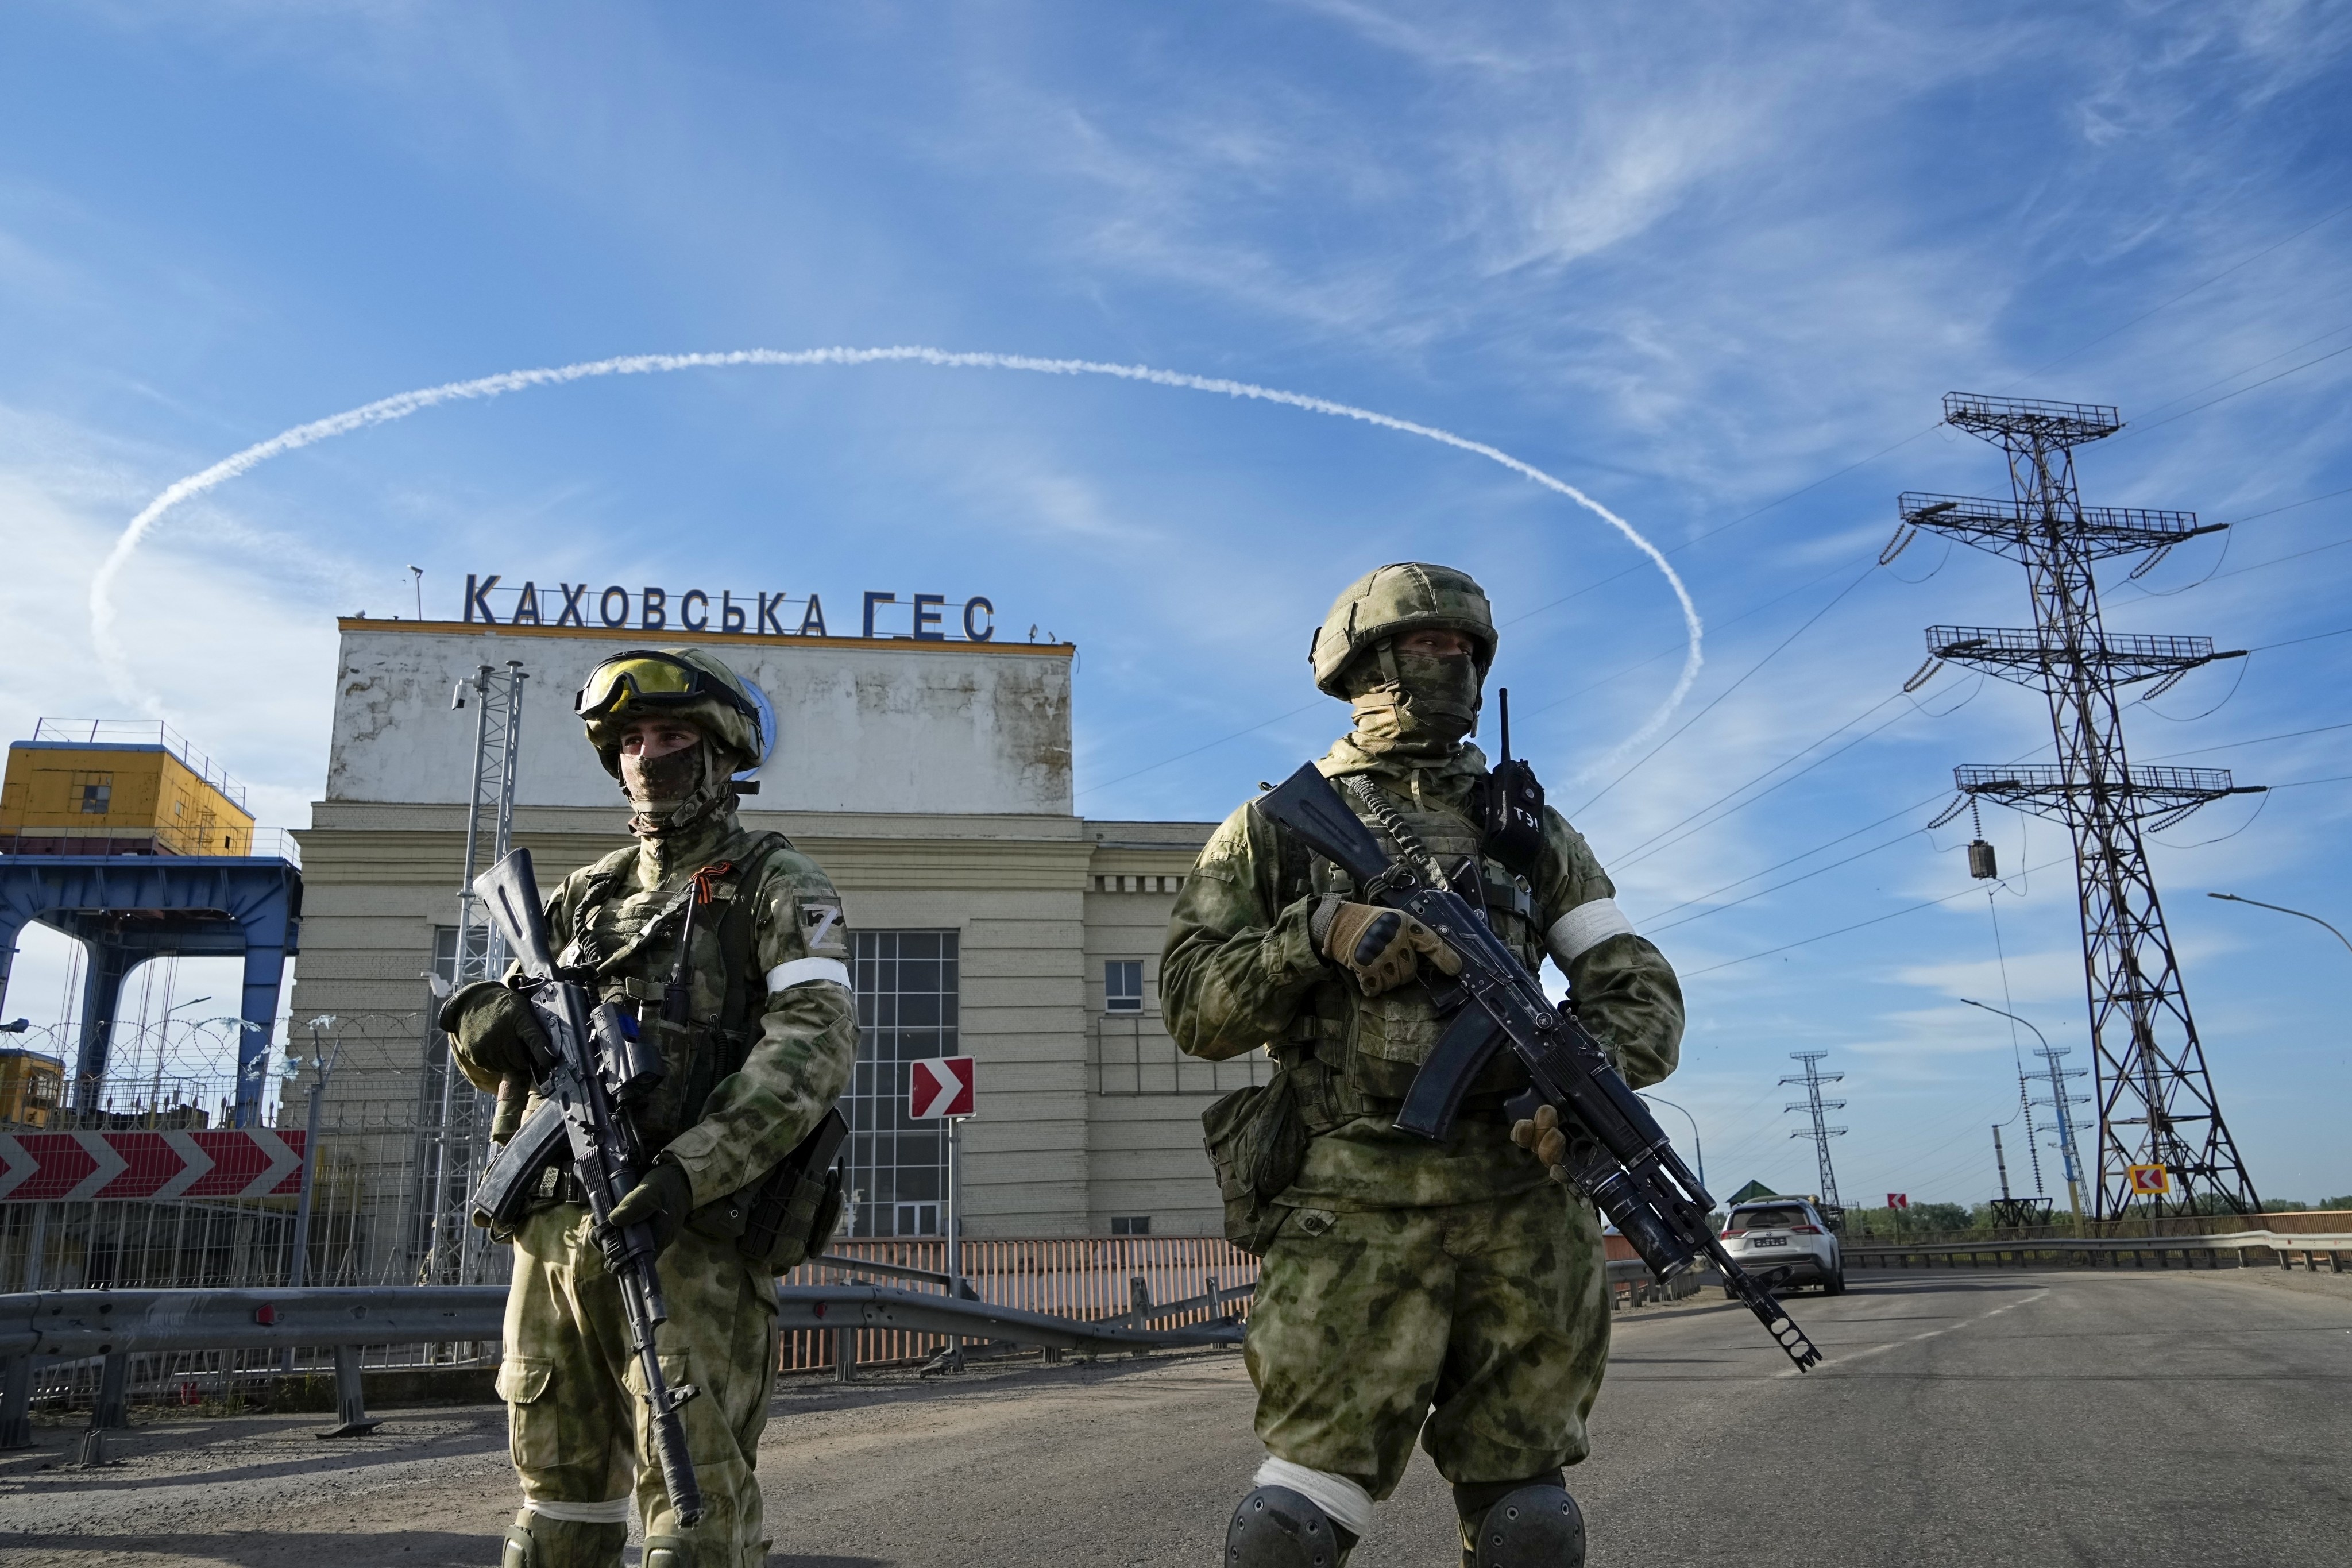 Russian troops guard the Kakhovka hydroelectric station, in Kherson, south Ukraine, on May 20. According to Russian state TV, the future of the Ukrainian regions occupied by Moscow’s forces is all but decided. Photo: AP